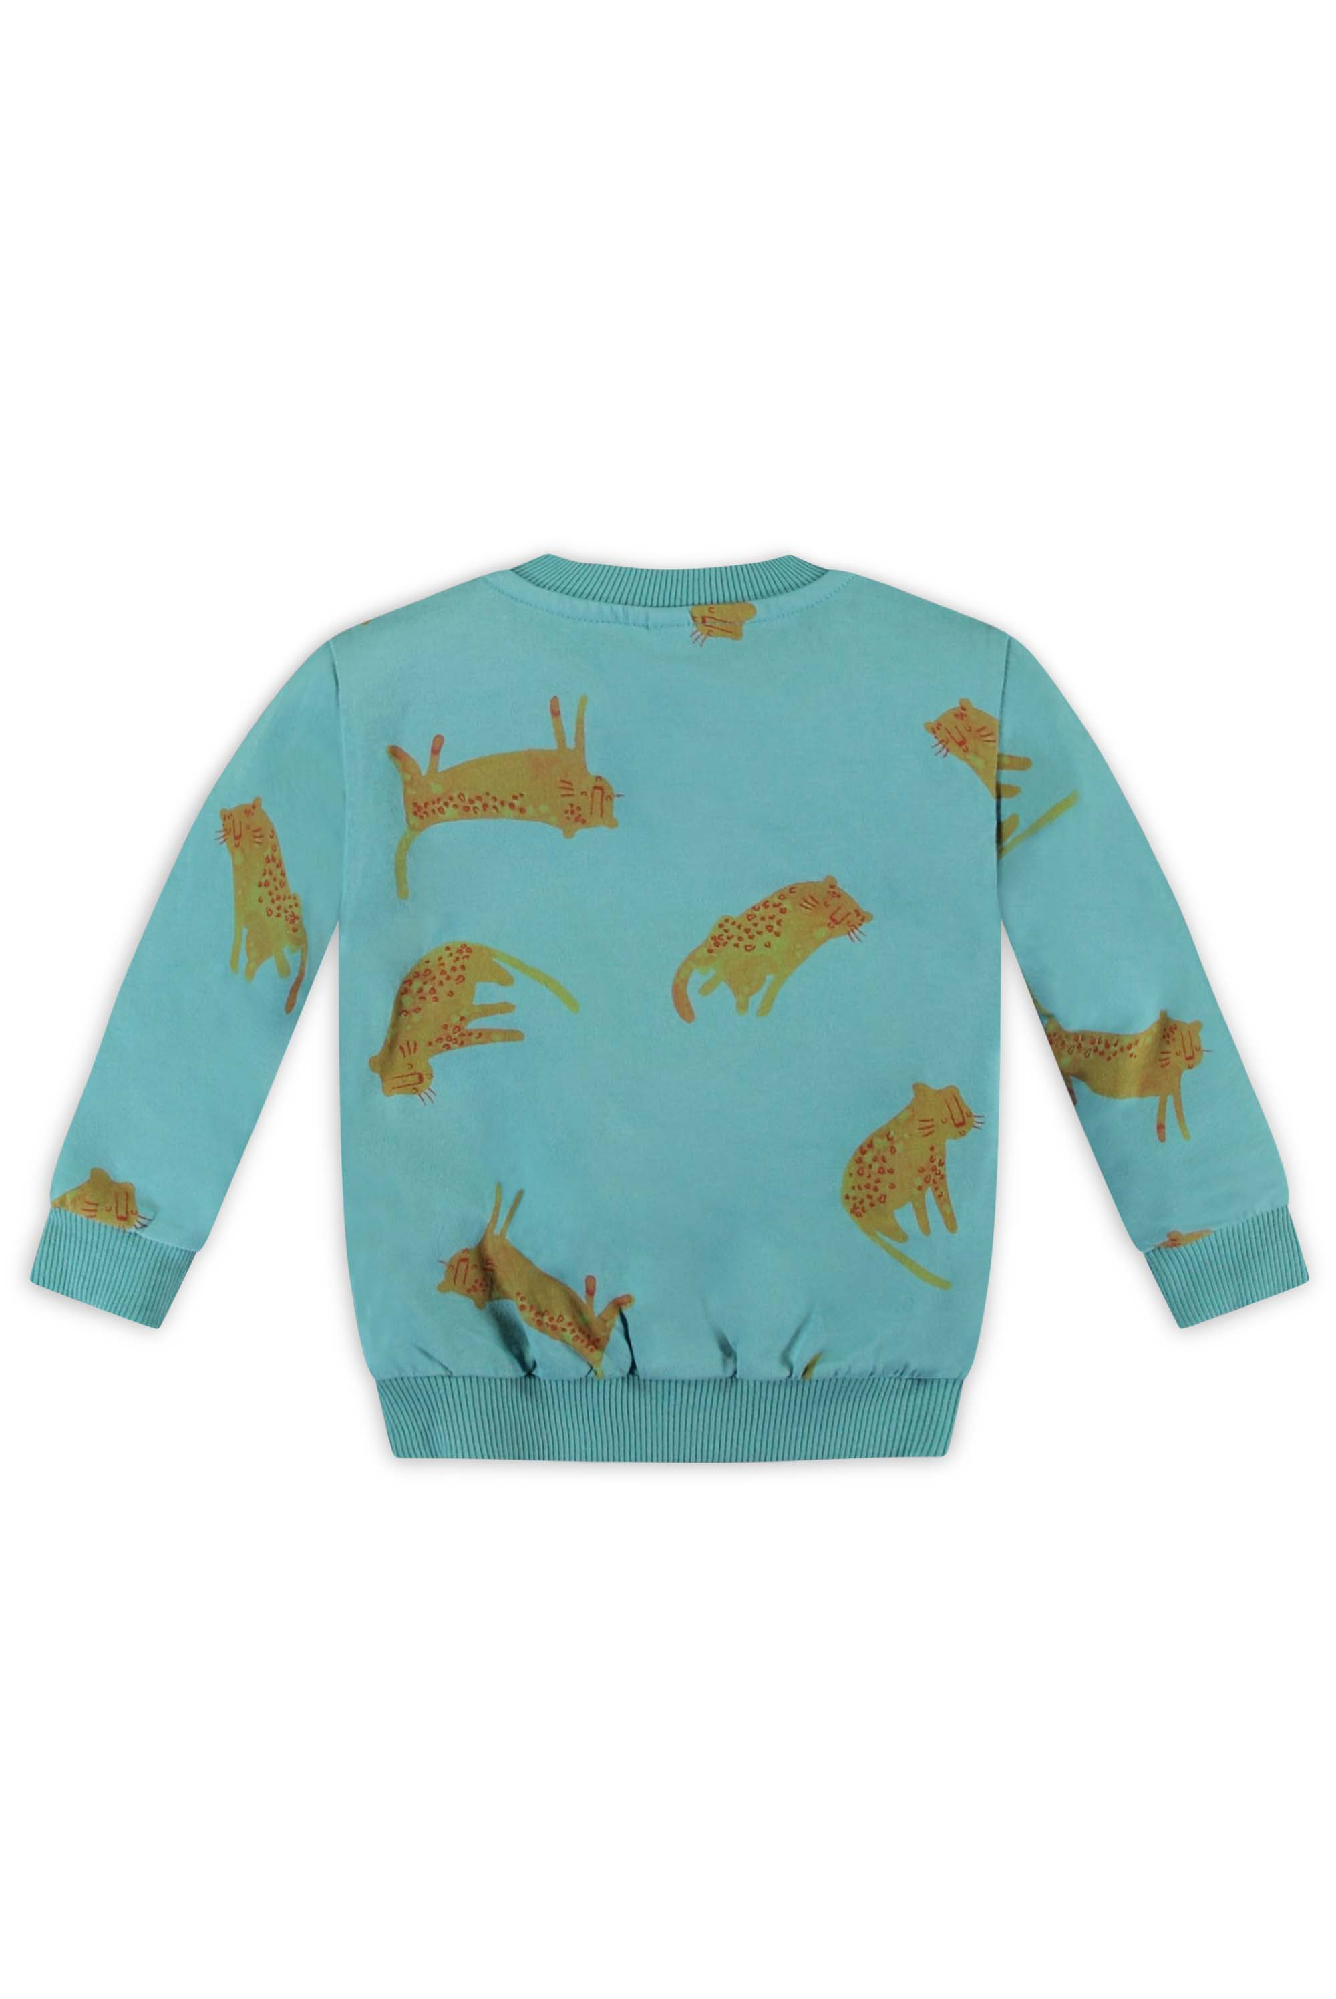 Jongens Sweater with wild panther aop and pouch pocket van The New Chapter in de kleur Wild panther ao in maat 86.